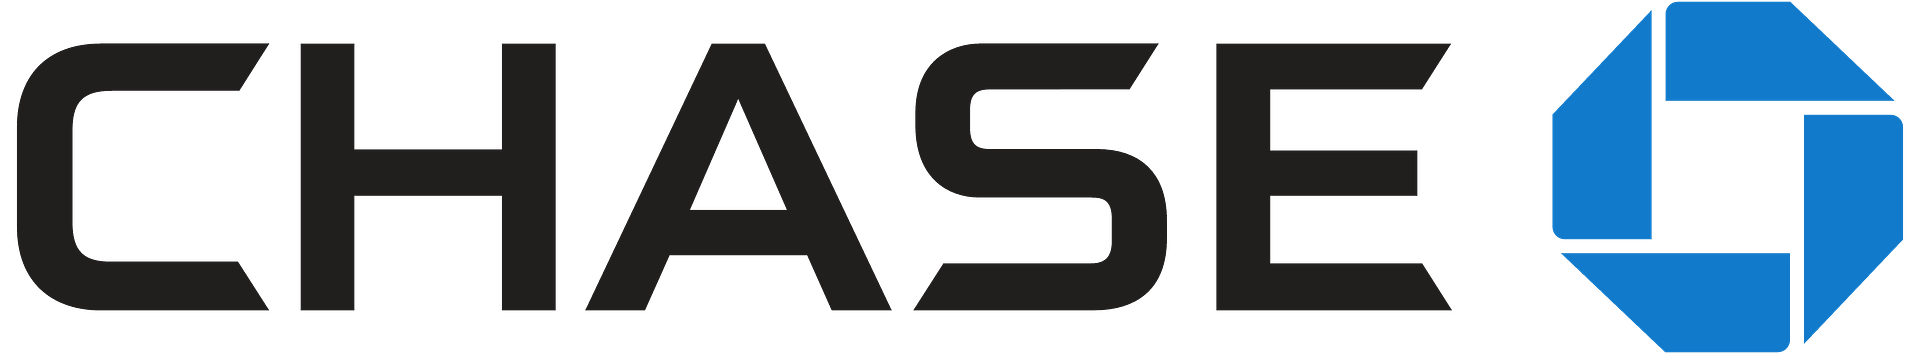 logo for chase